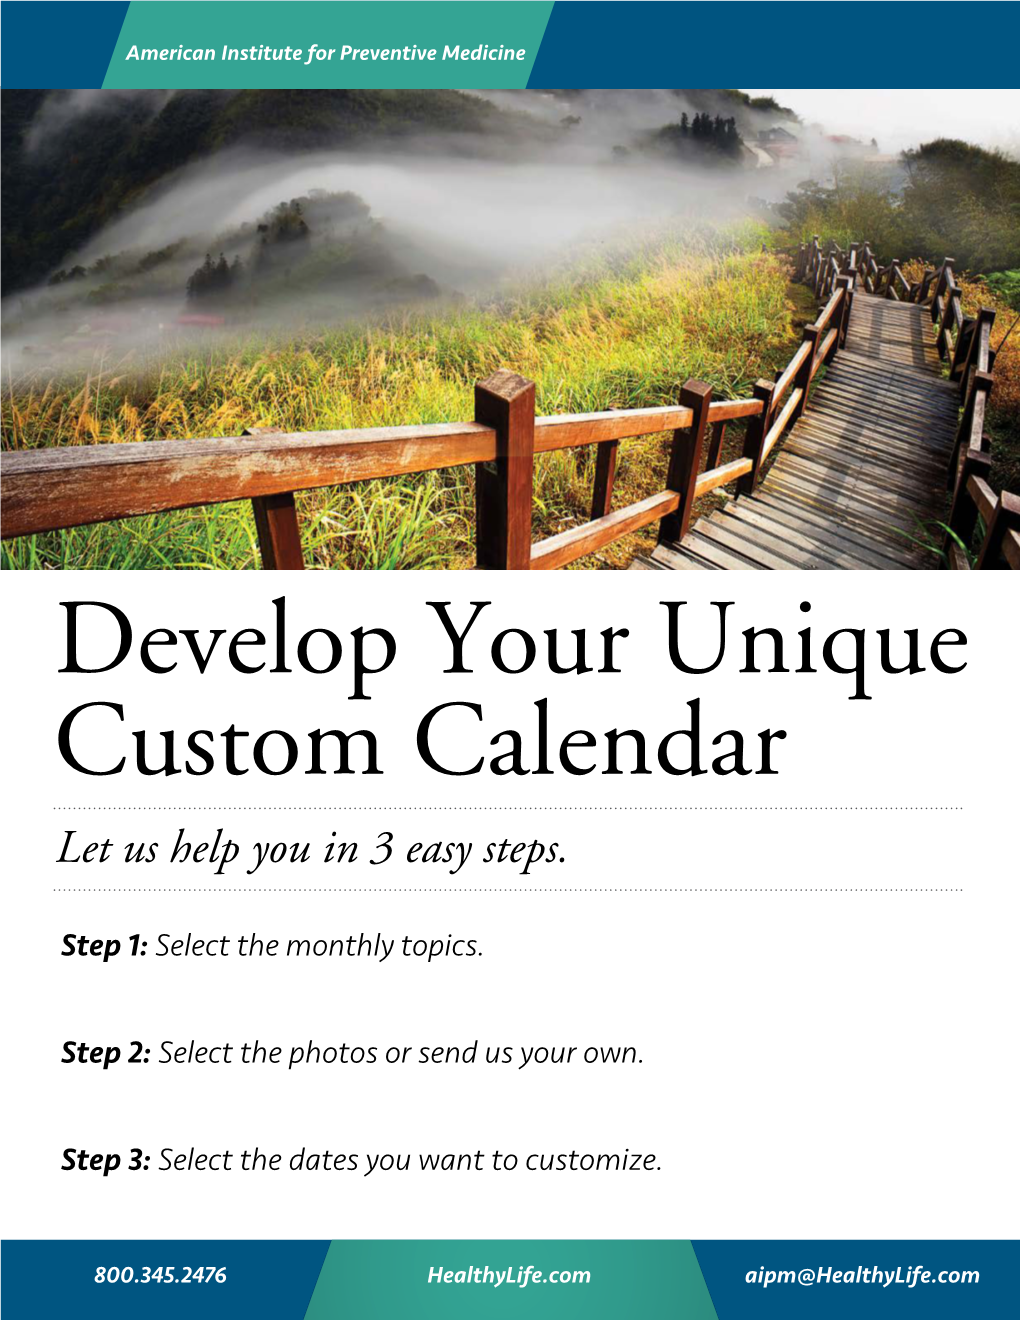 Develop Your Unique Custom Calendar Let Us Help You in 3 Easy Steps